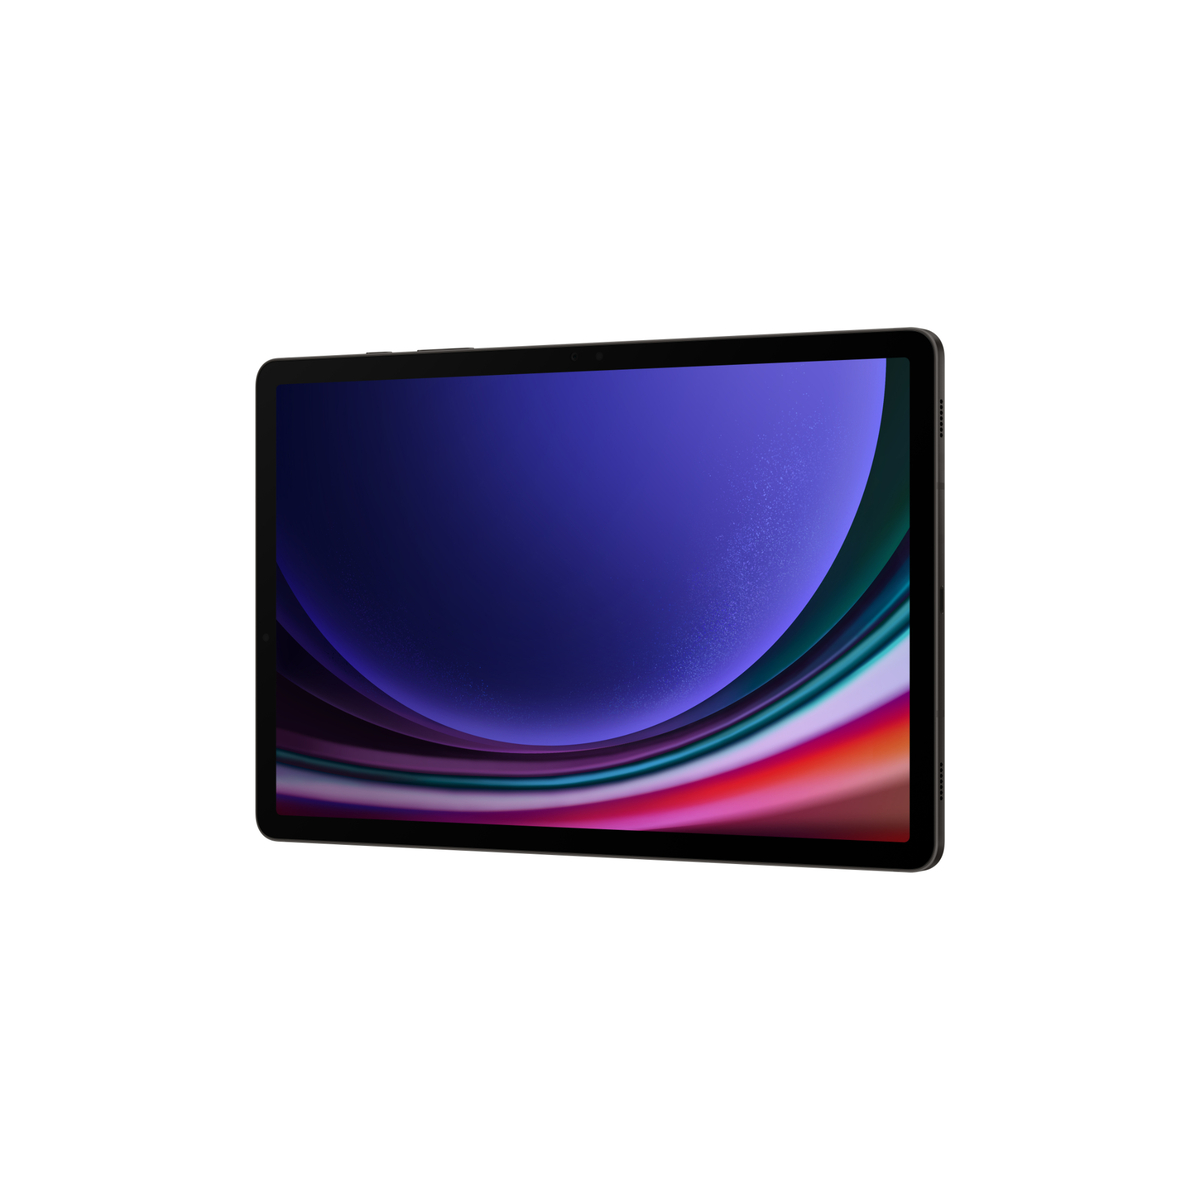 Samsung unveils its first FE tablets, meet the Galaxy Tab S9 FE+ and Galaxy  Tab S9 FE (Now Available) 